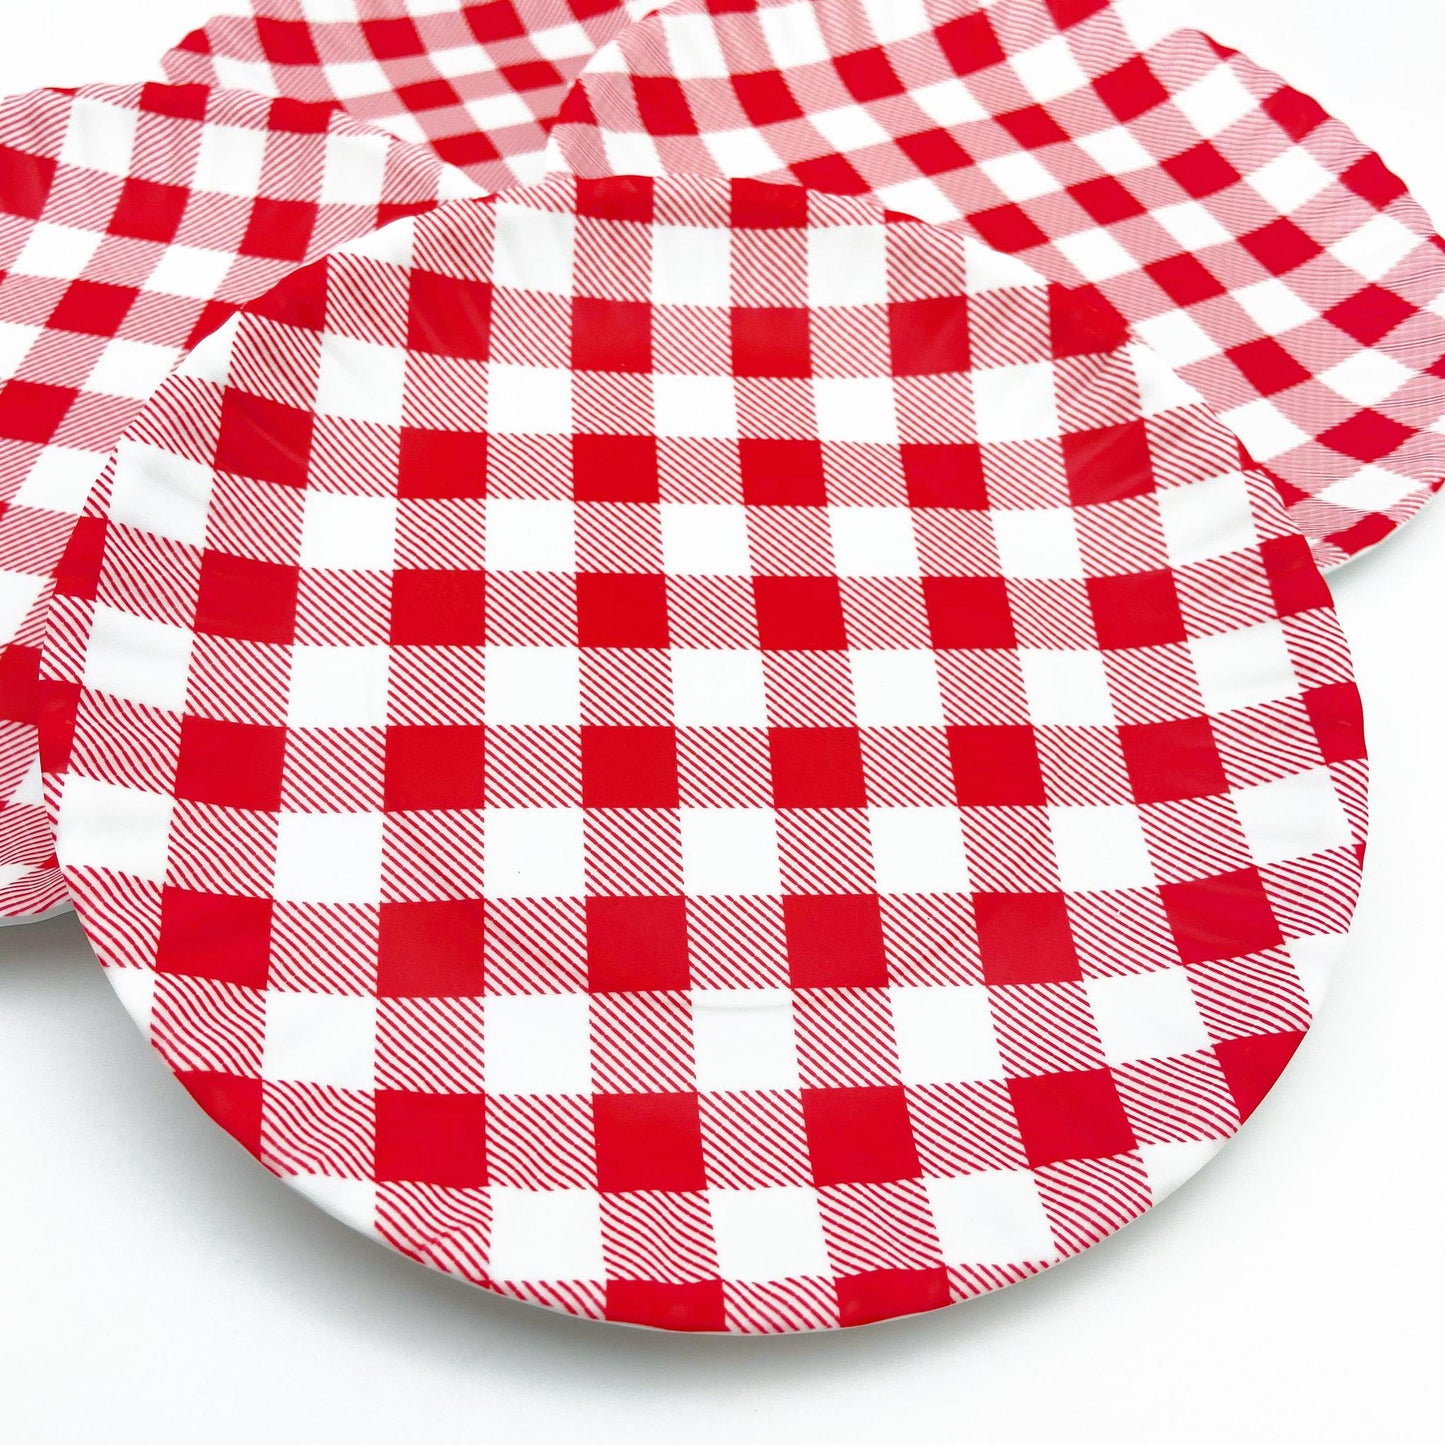 Plate - Melamine "Paper Plate" - Red Gingham